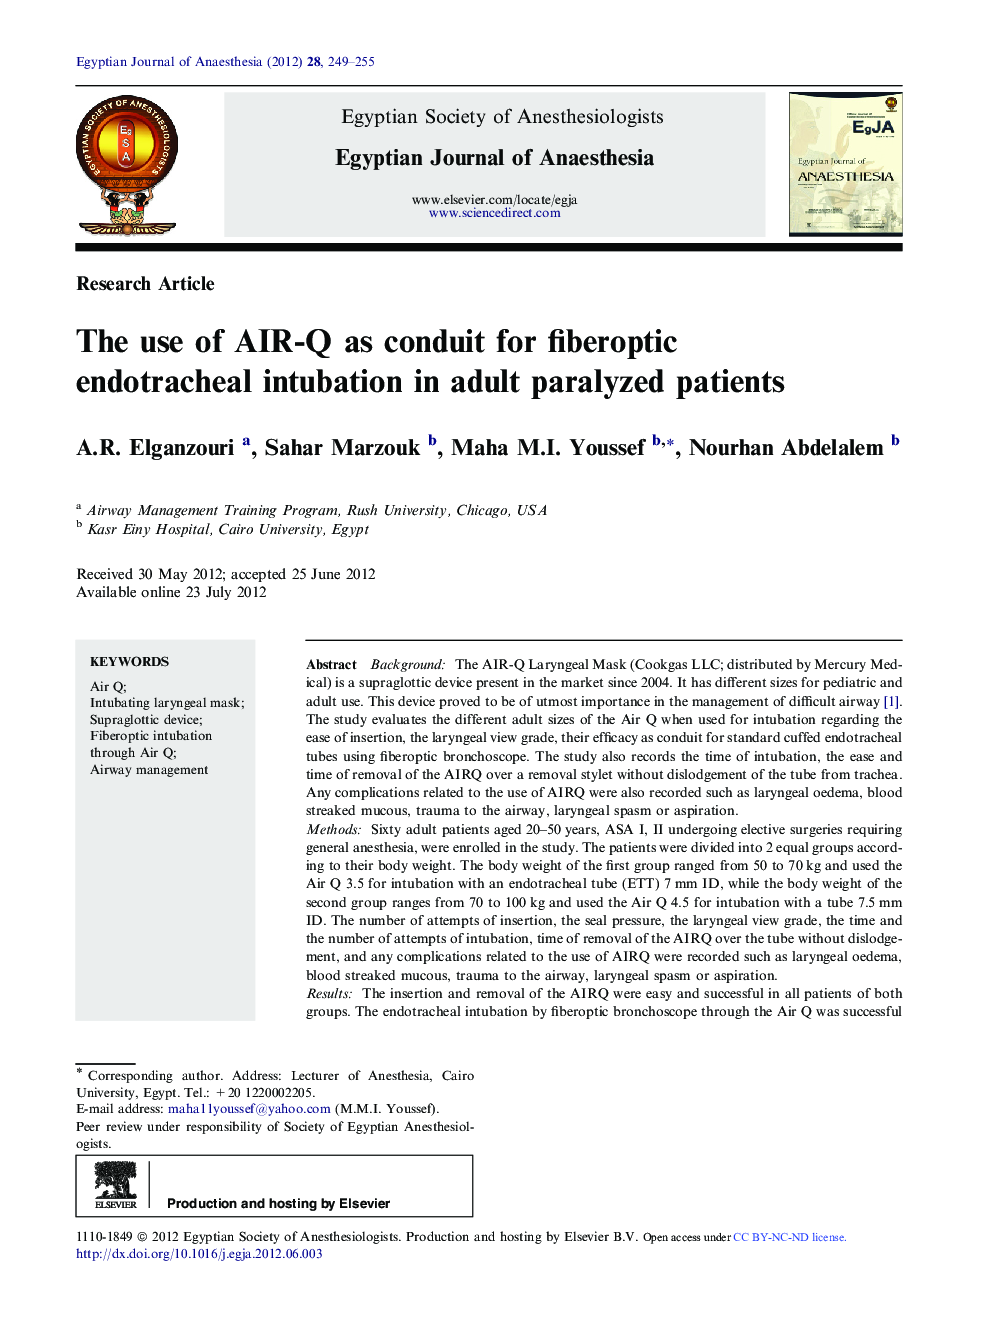 The use of AIR-Q as conduit for fiberoptic endotracheal intubation in adult paralyzed patients 